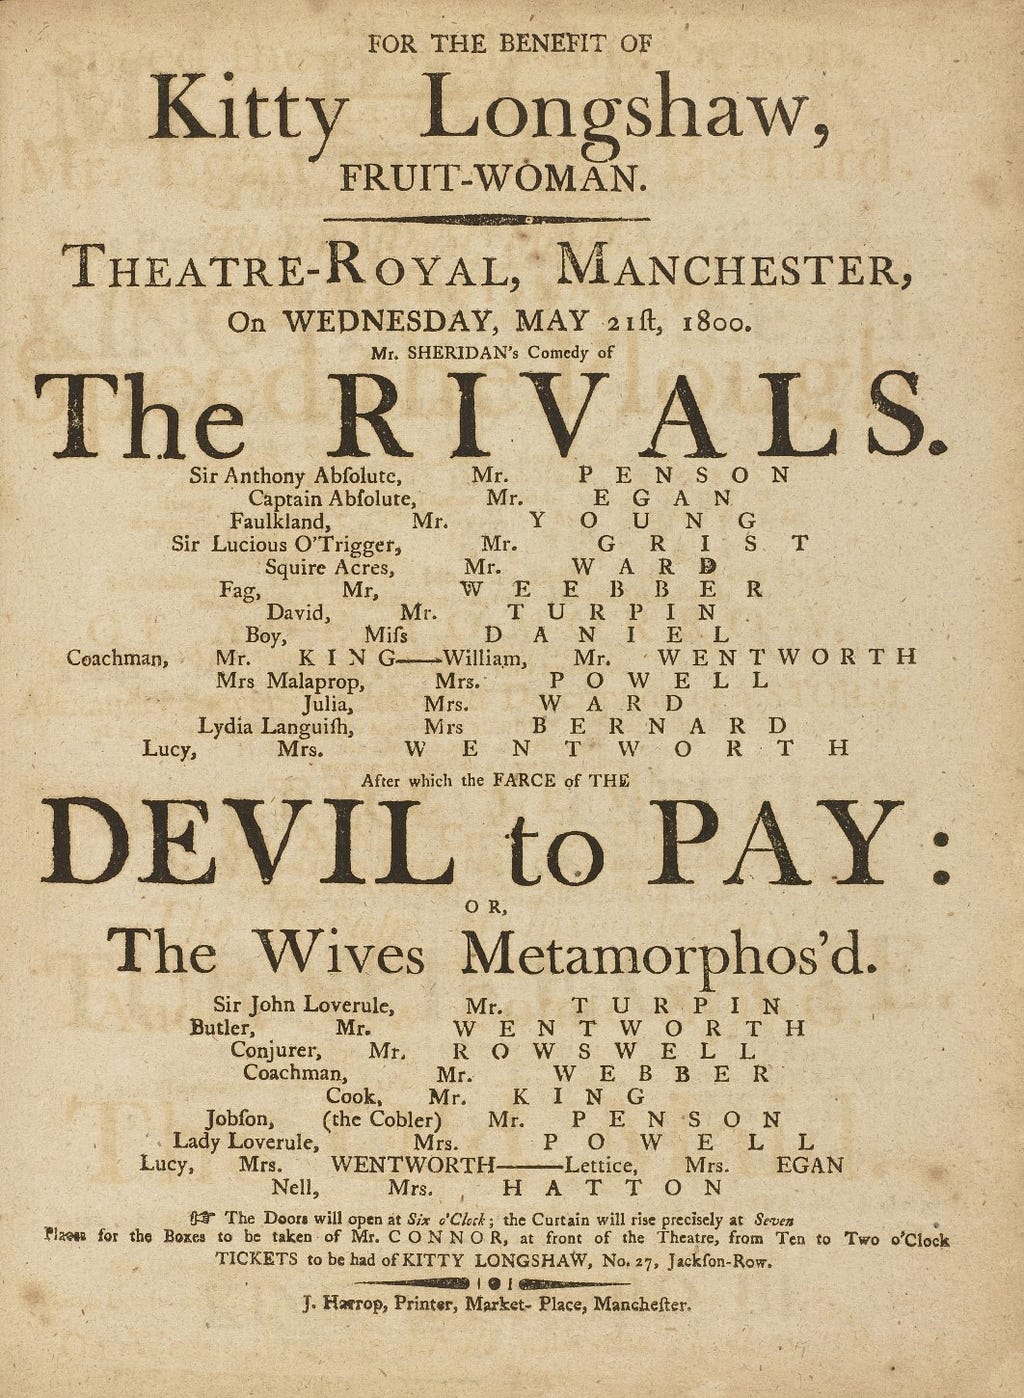 1800 Manchester Theatre Royal playbill for ‘The Rivals’ and ‘Devil to Pay’. Benefit evening for Kitty Longshaw, fruit-woman.